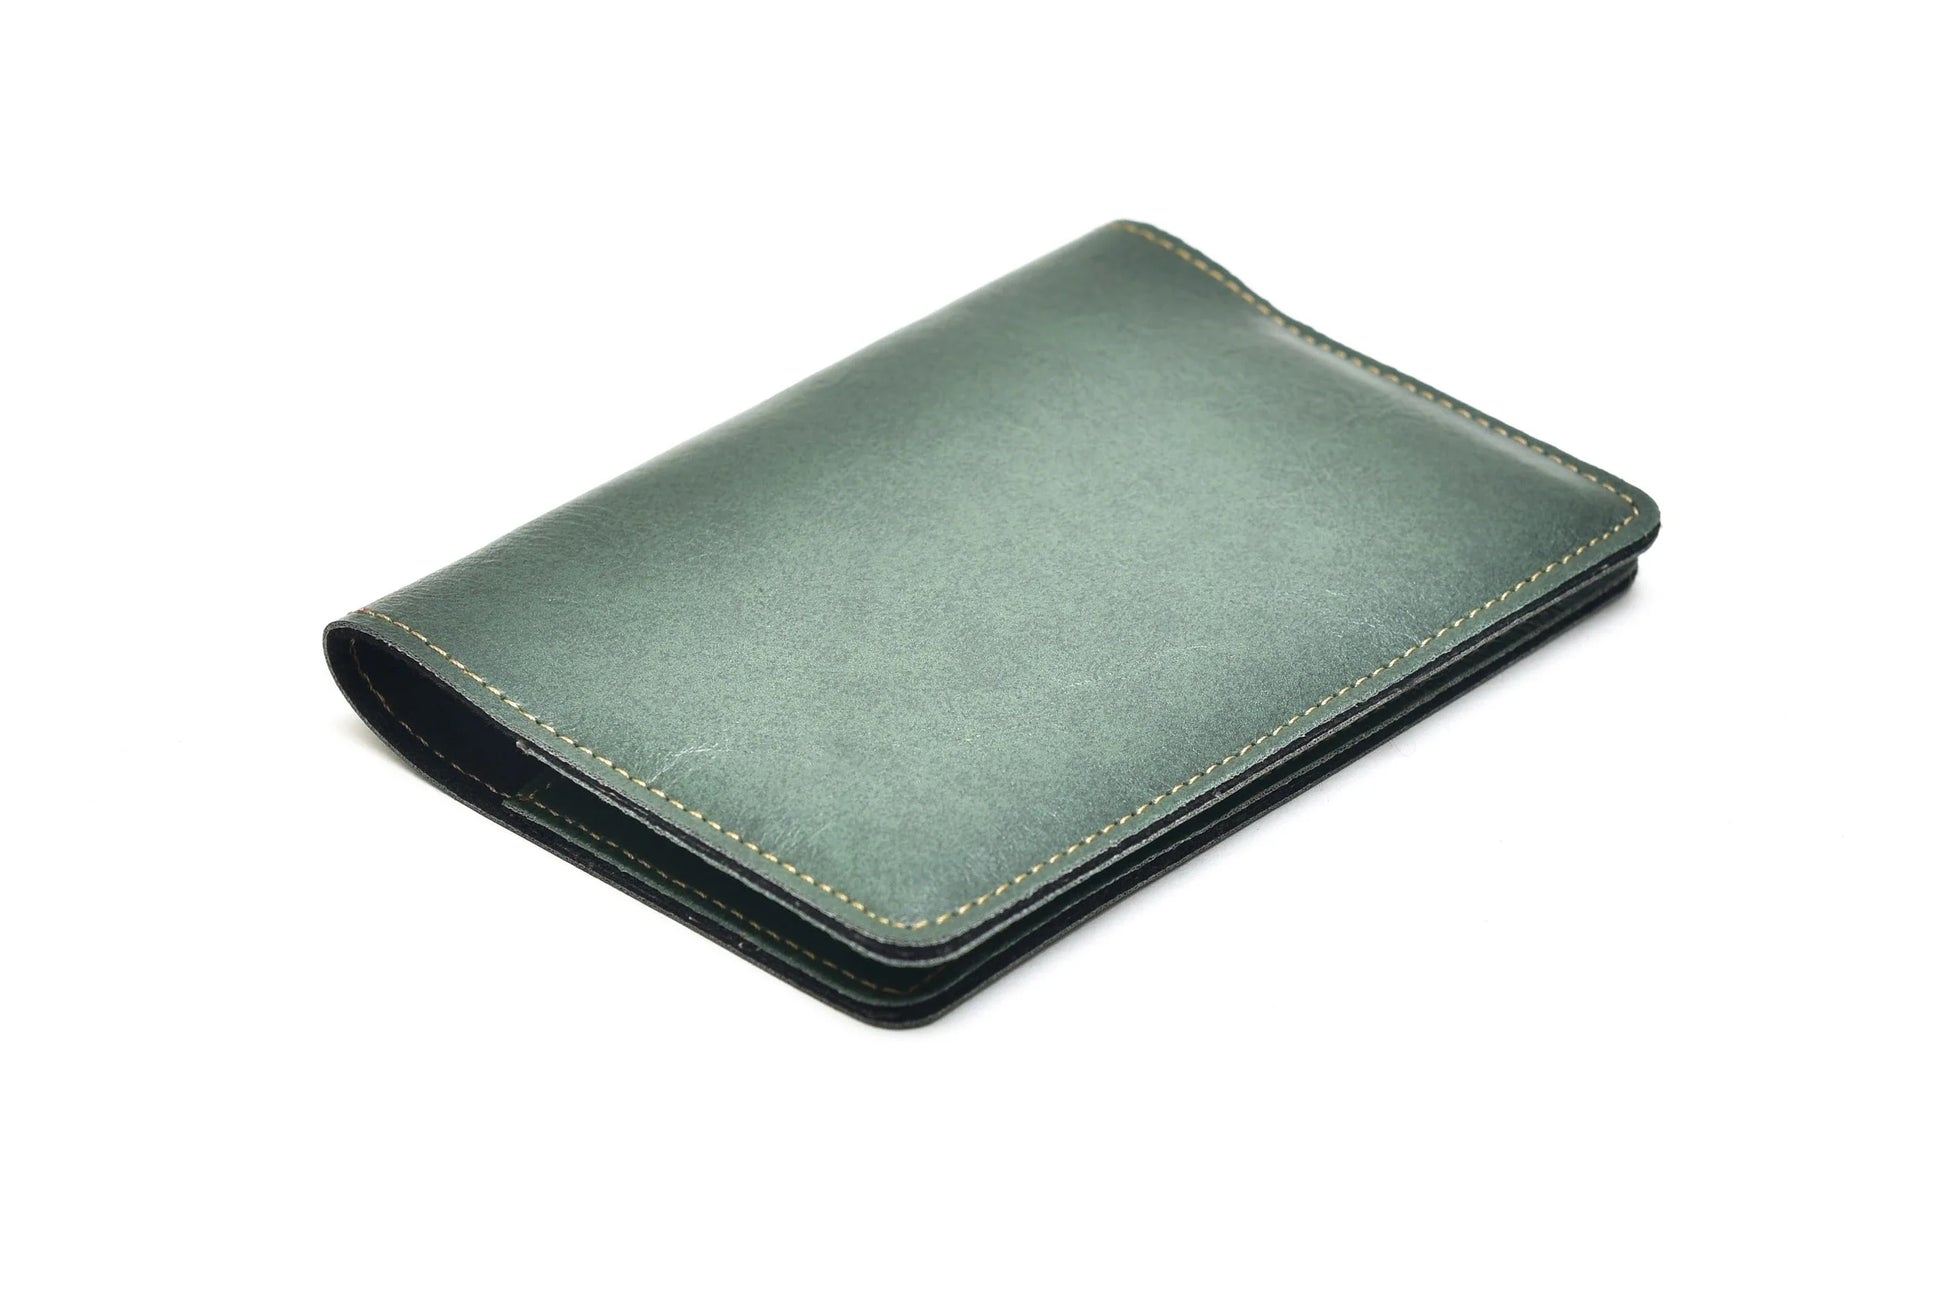 Protect your passport in luxurious style with a customized leather case designed for the classy traveler.